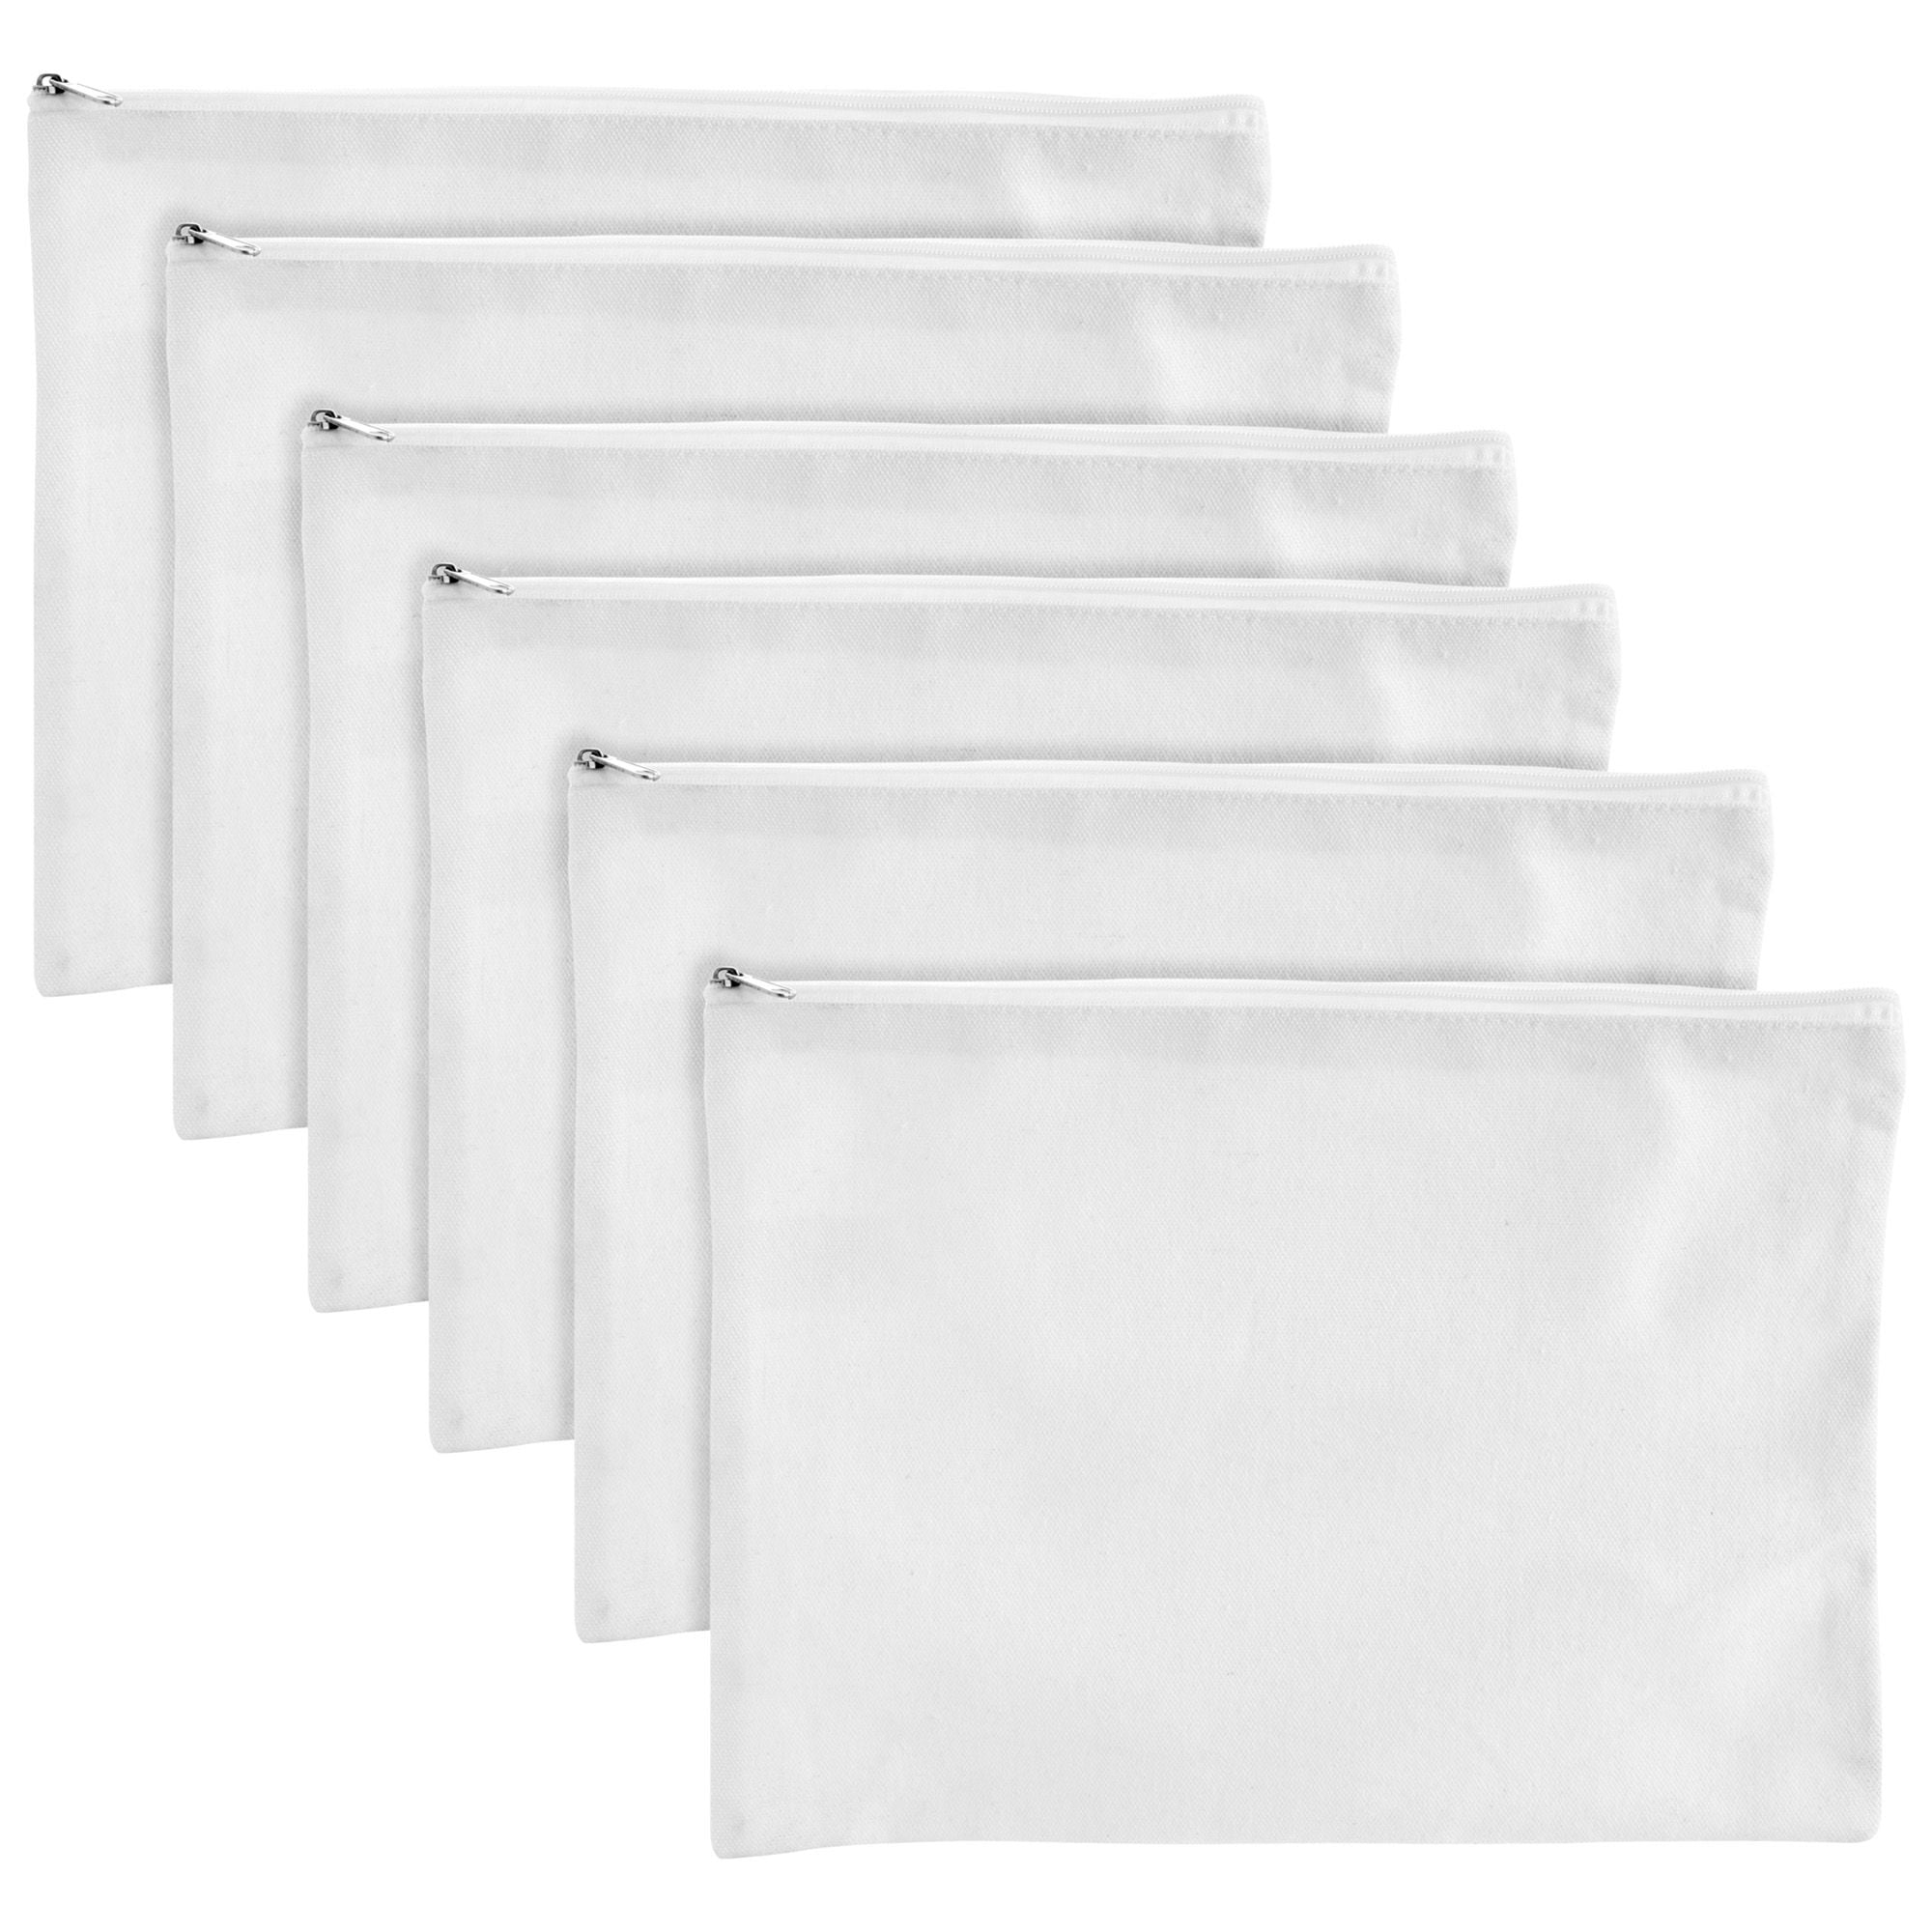 12 Pack Canvas Makeup Bag, DIY Blank Zippers Pouches for Cosmetic, Pencil  Case, Party Gift Bags, Travel, Craft and Coins Purse - White 8 x 6 inches